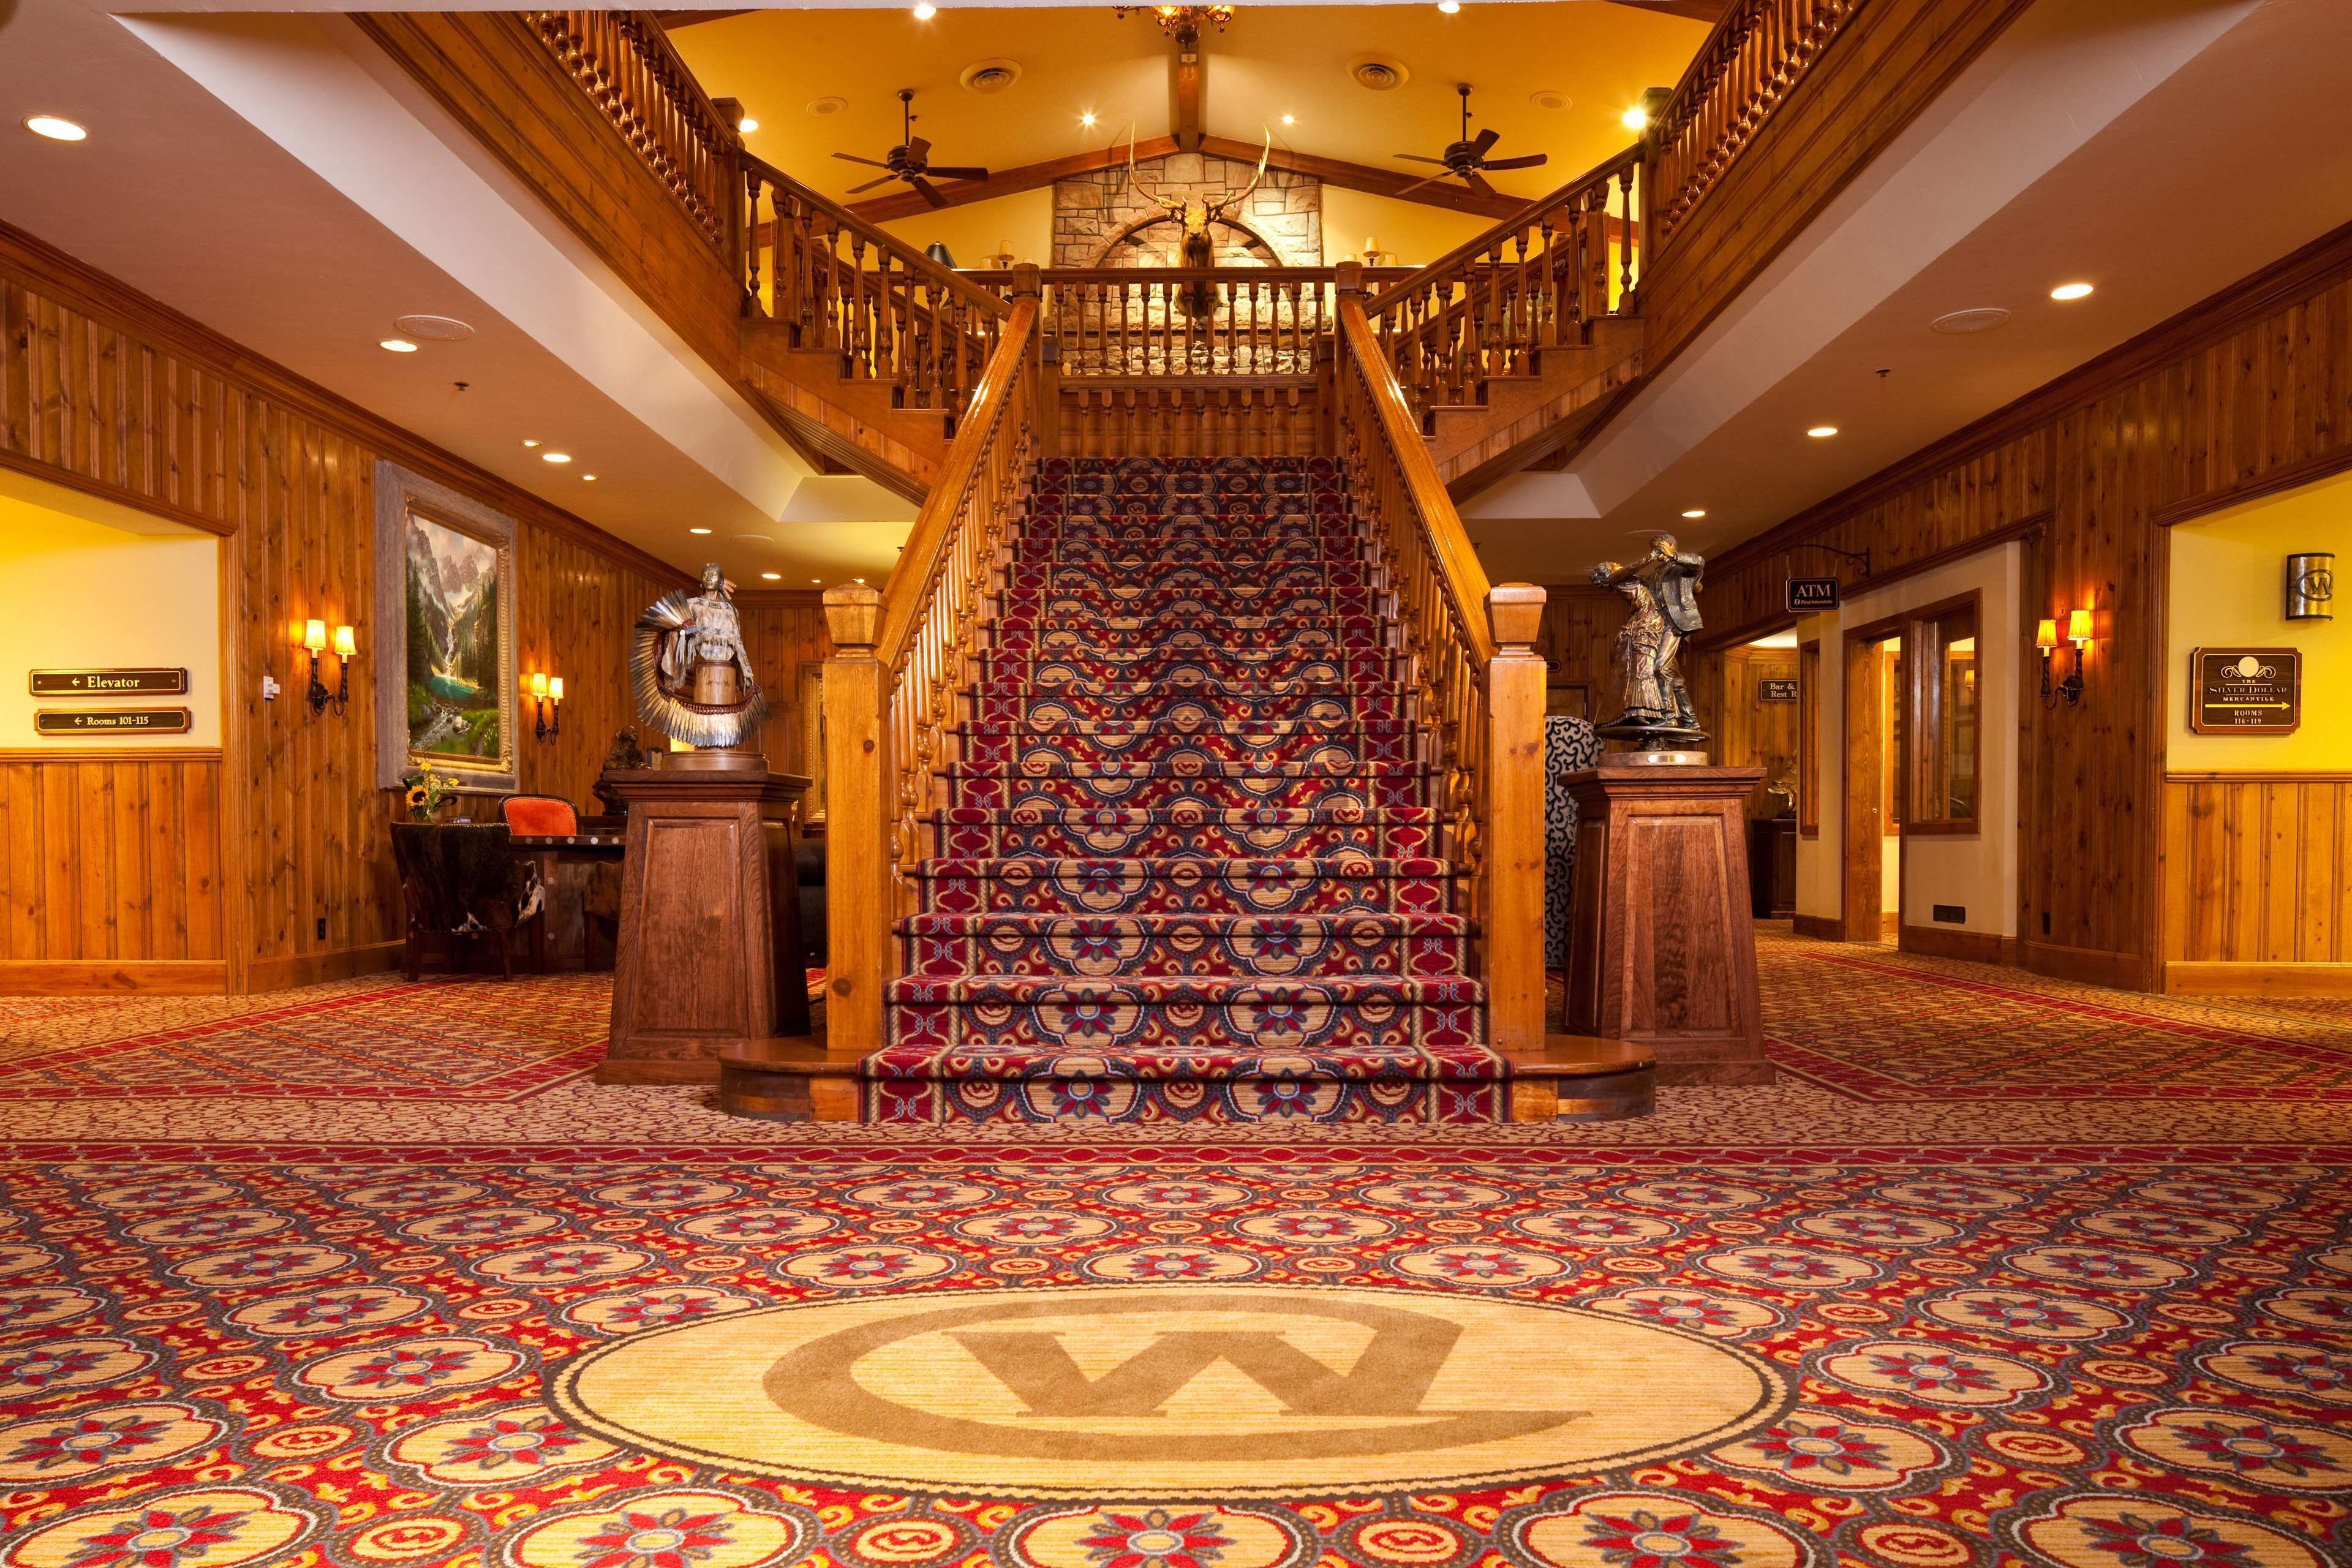 Stair view of Wort Hotel